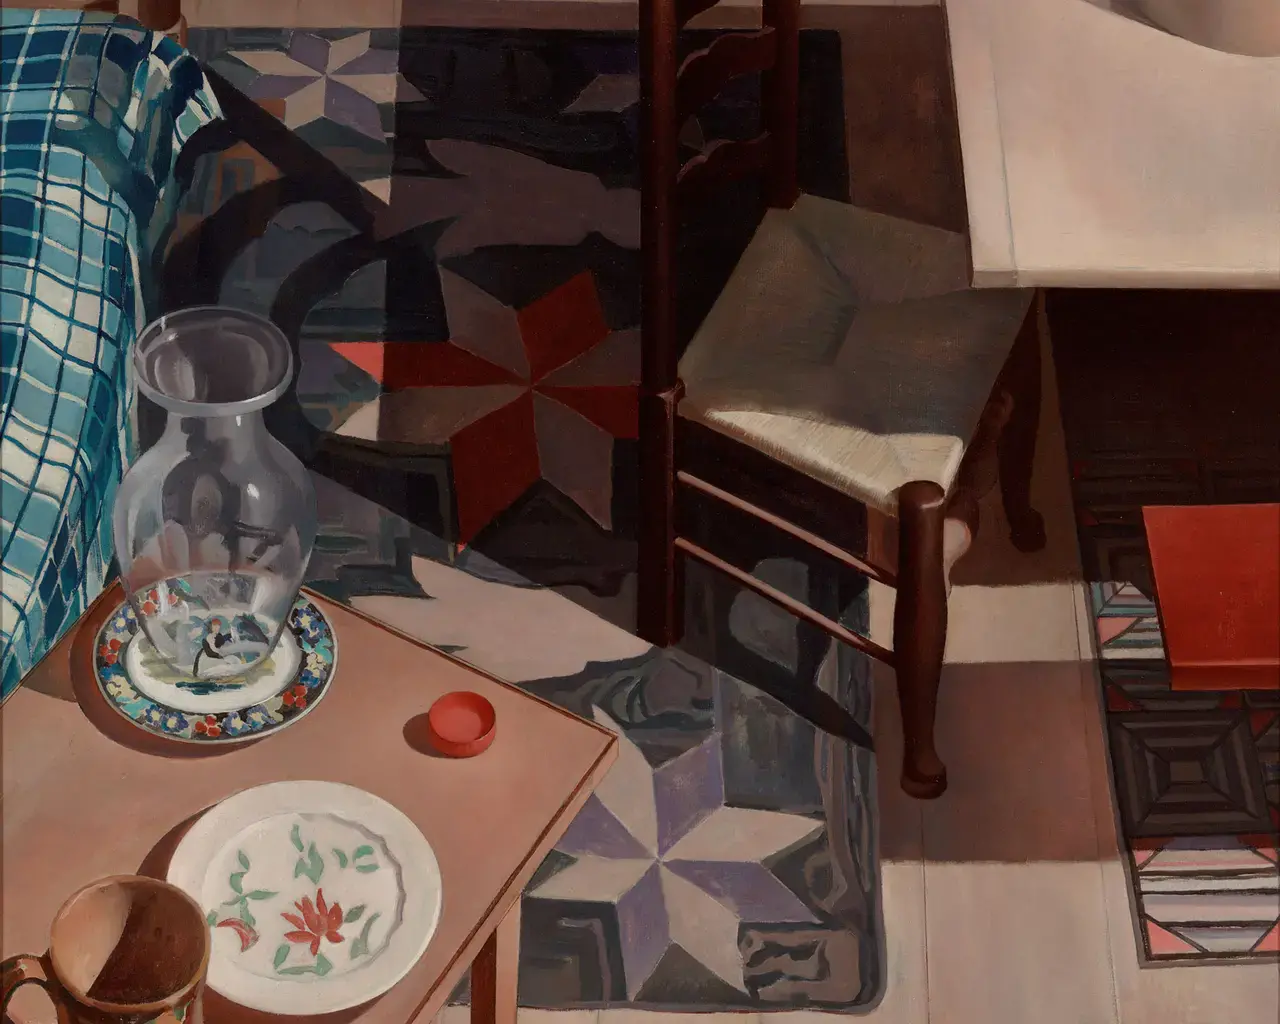 Charles Sheeler (1883-1965), American Interior, 1934, oil on canvas, 32 &frac12; x 30 in. Photo courtesy of Yale University Art Gallery.